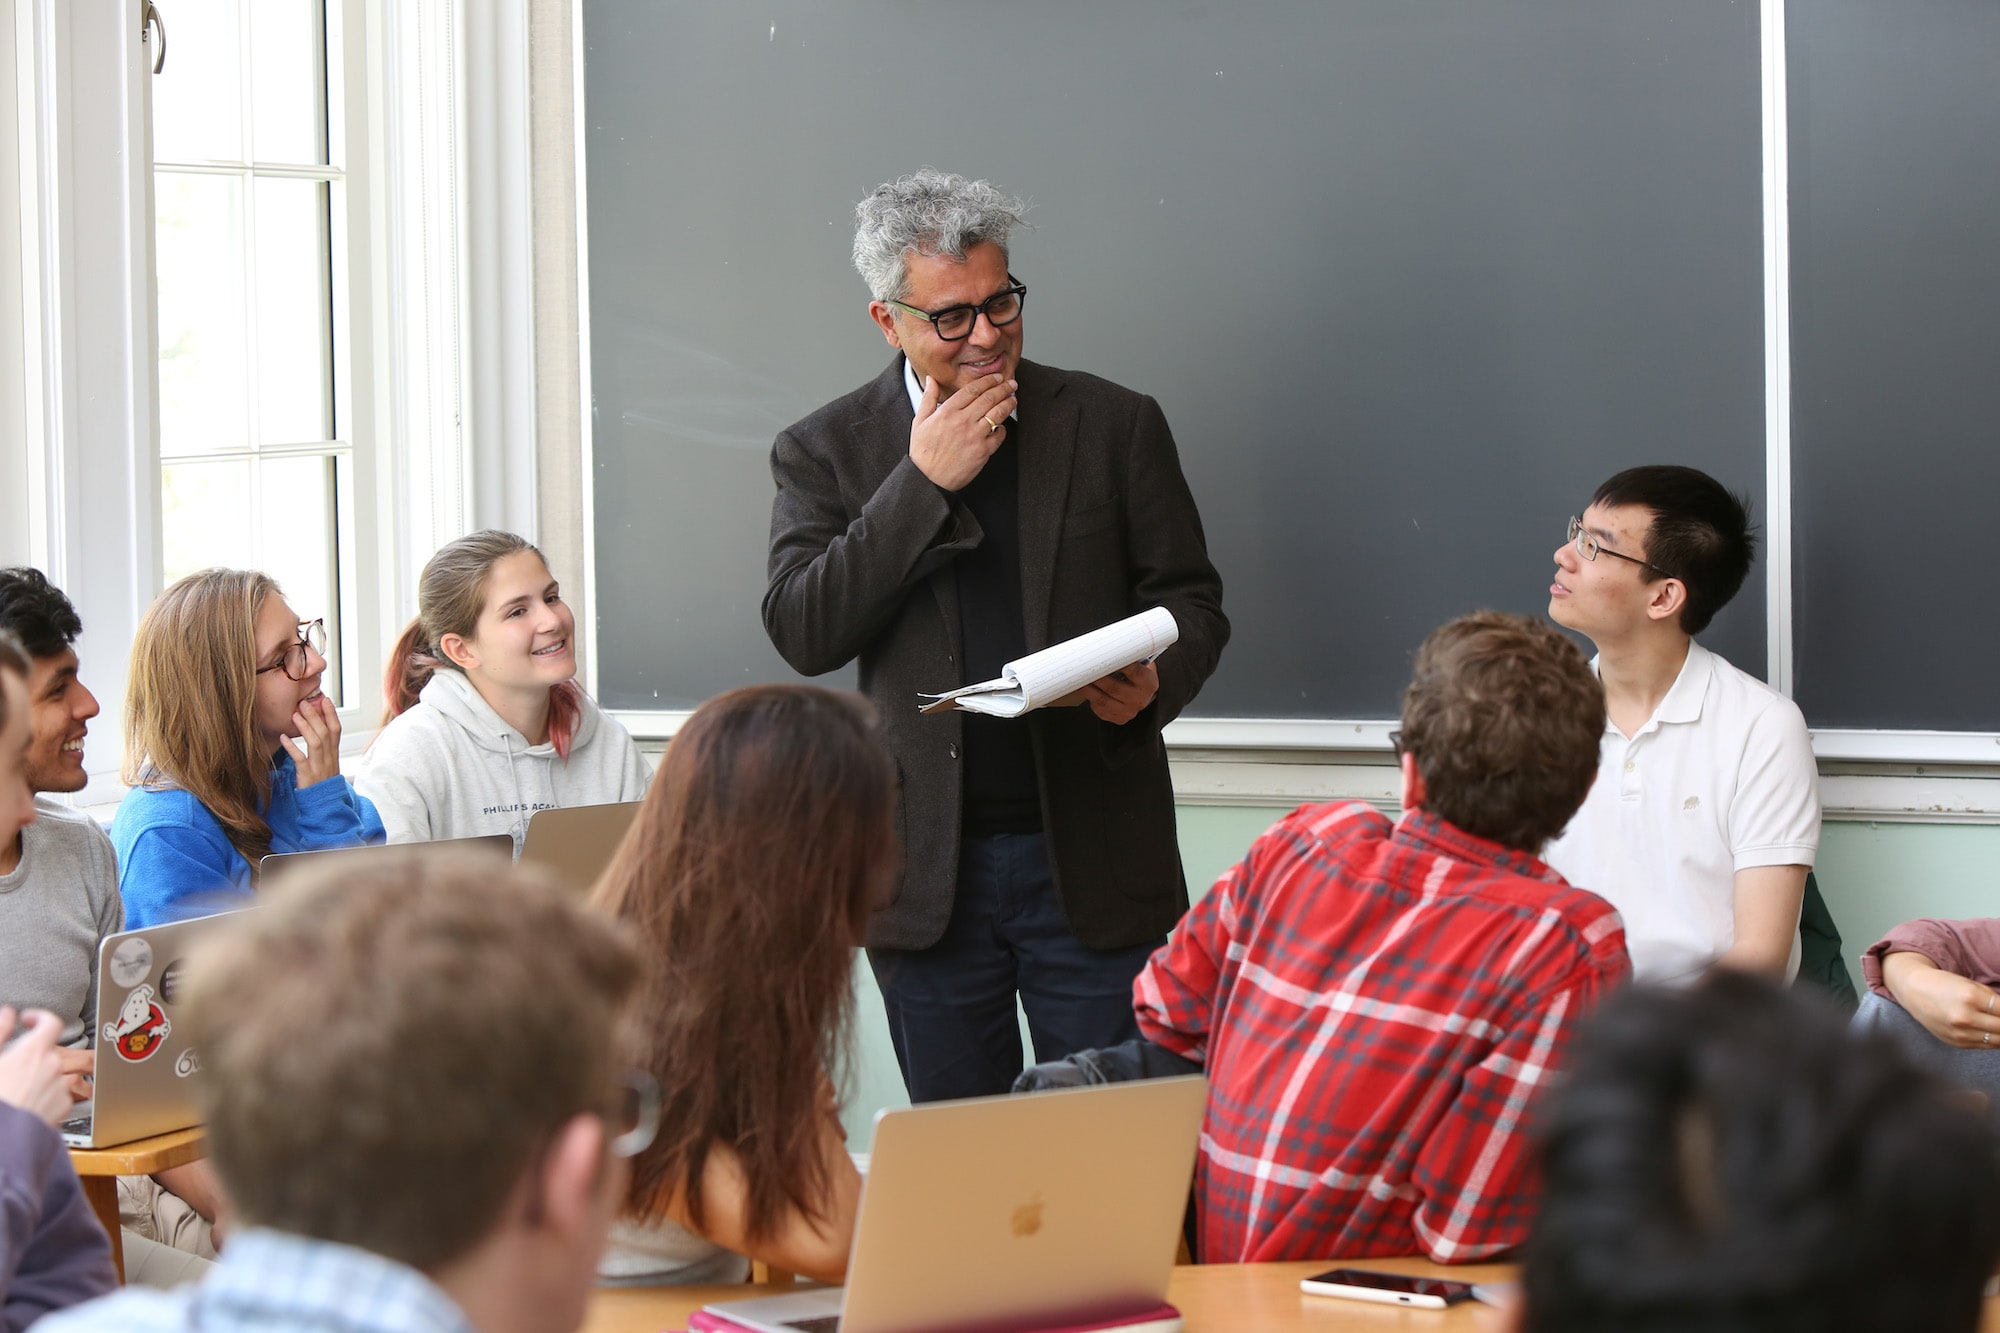 A professor stands among students during a class